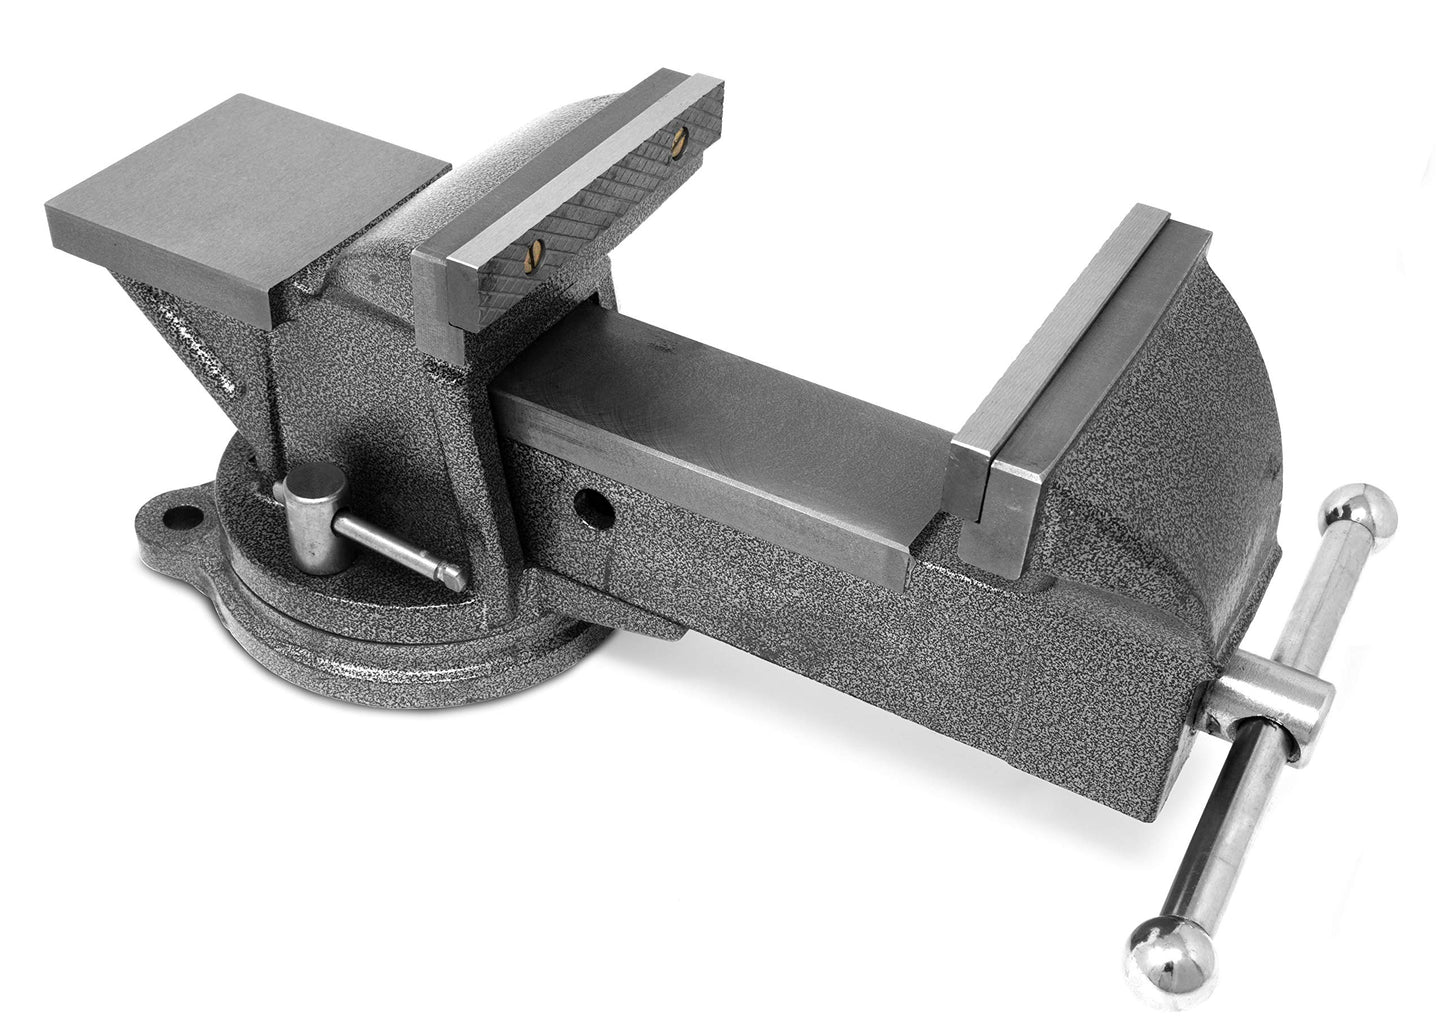 WEN Bench Vise, 5-Inch, Cast Iron with Swivel Base